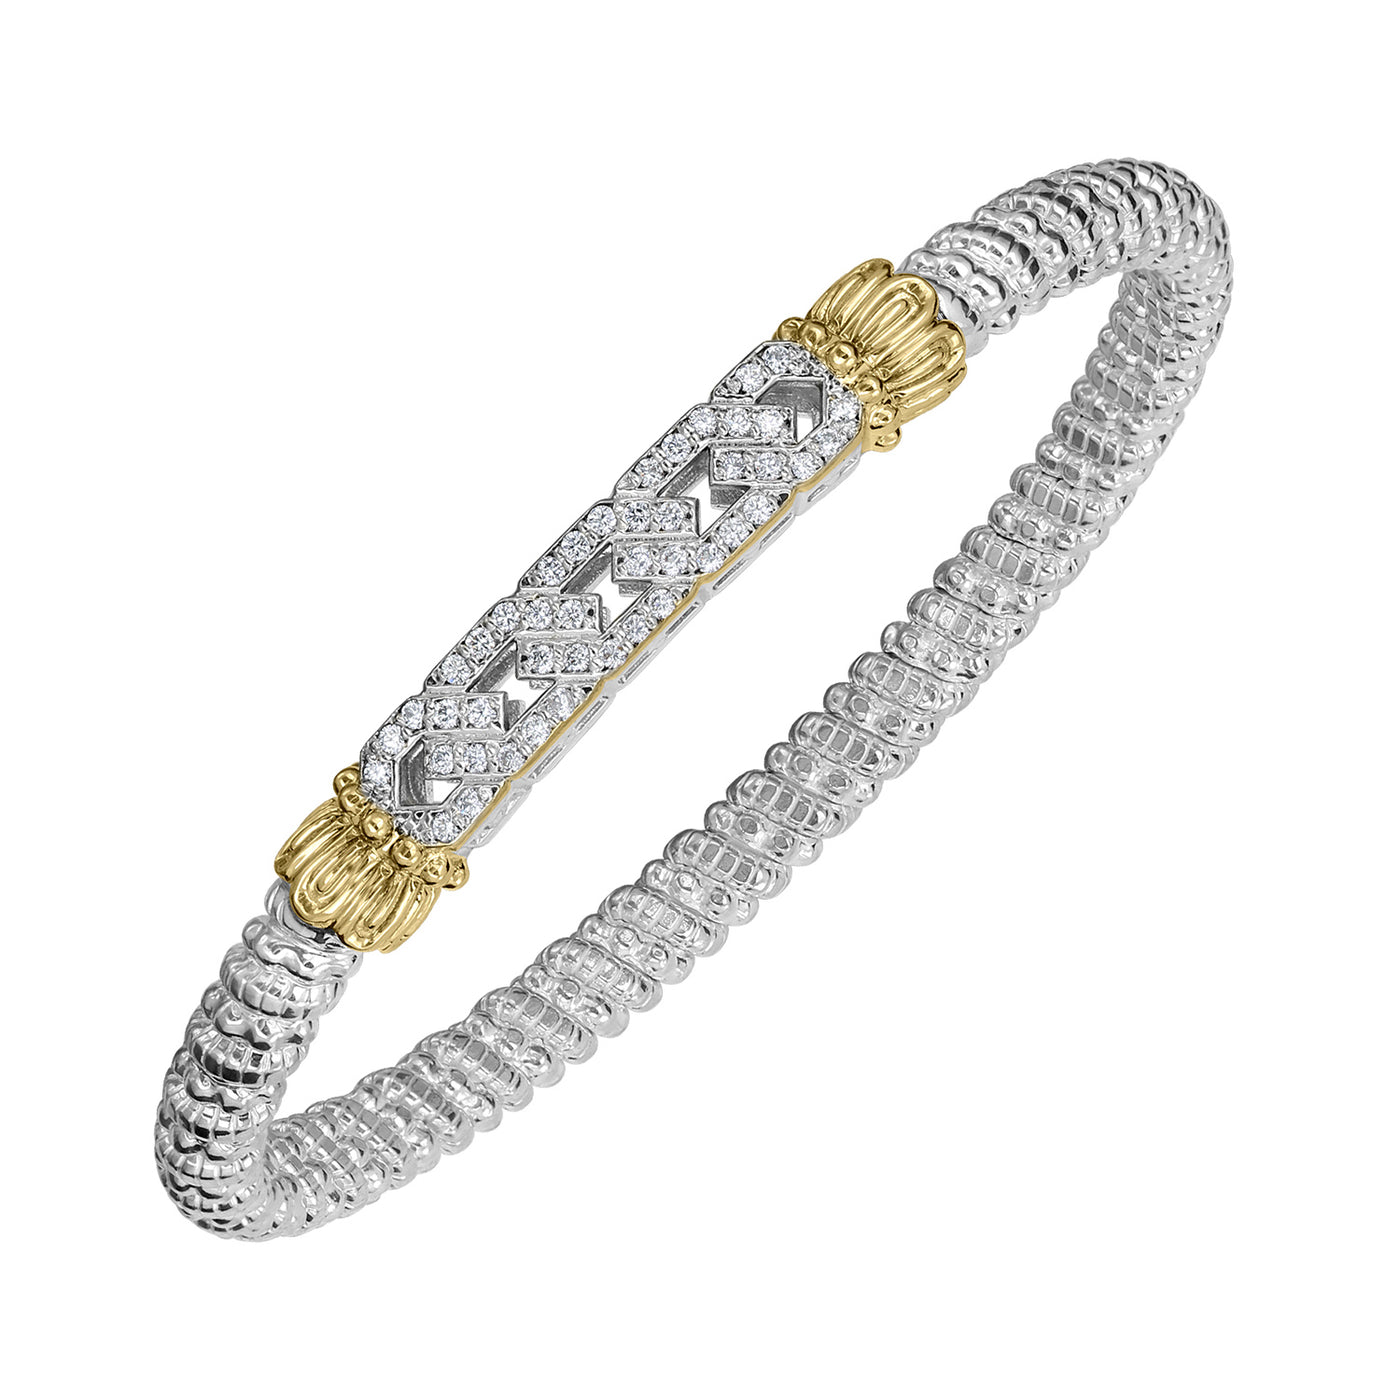 Vahan Sterling Silver and 14k Yellow Gold Moiré Beaded® Bangle Bracelet with Diamonds – 23535D04